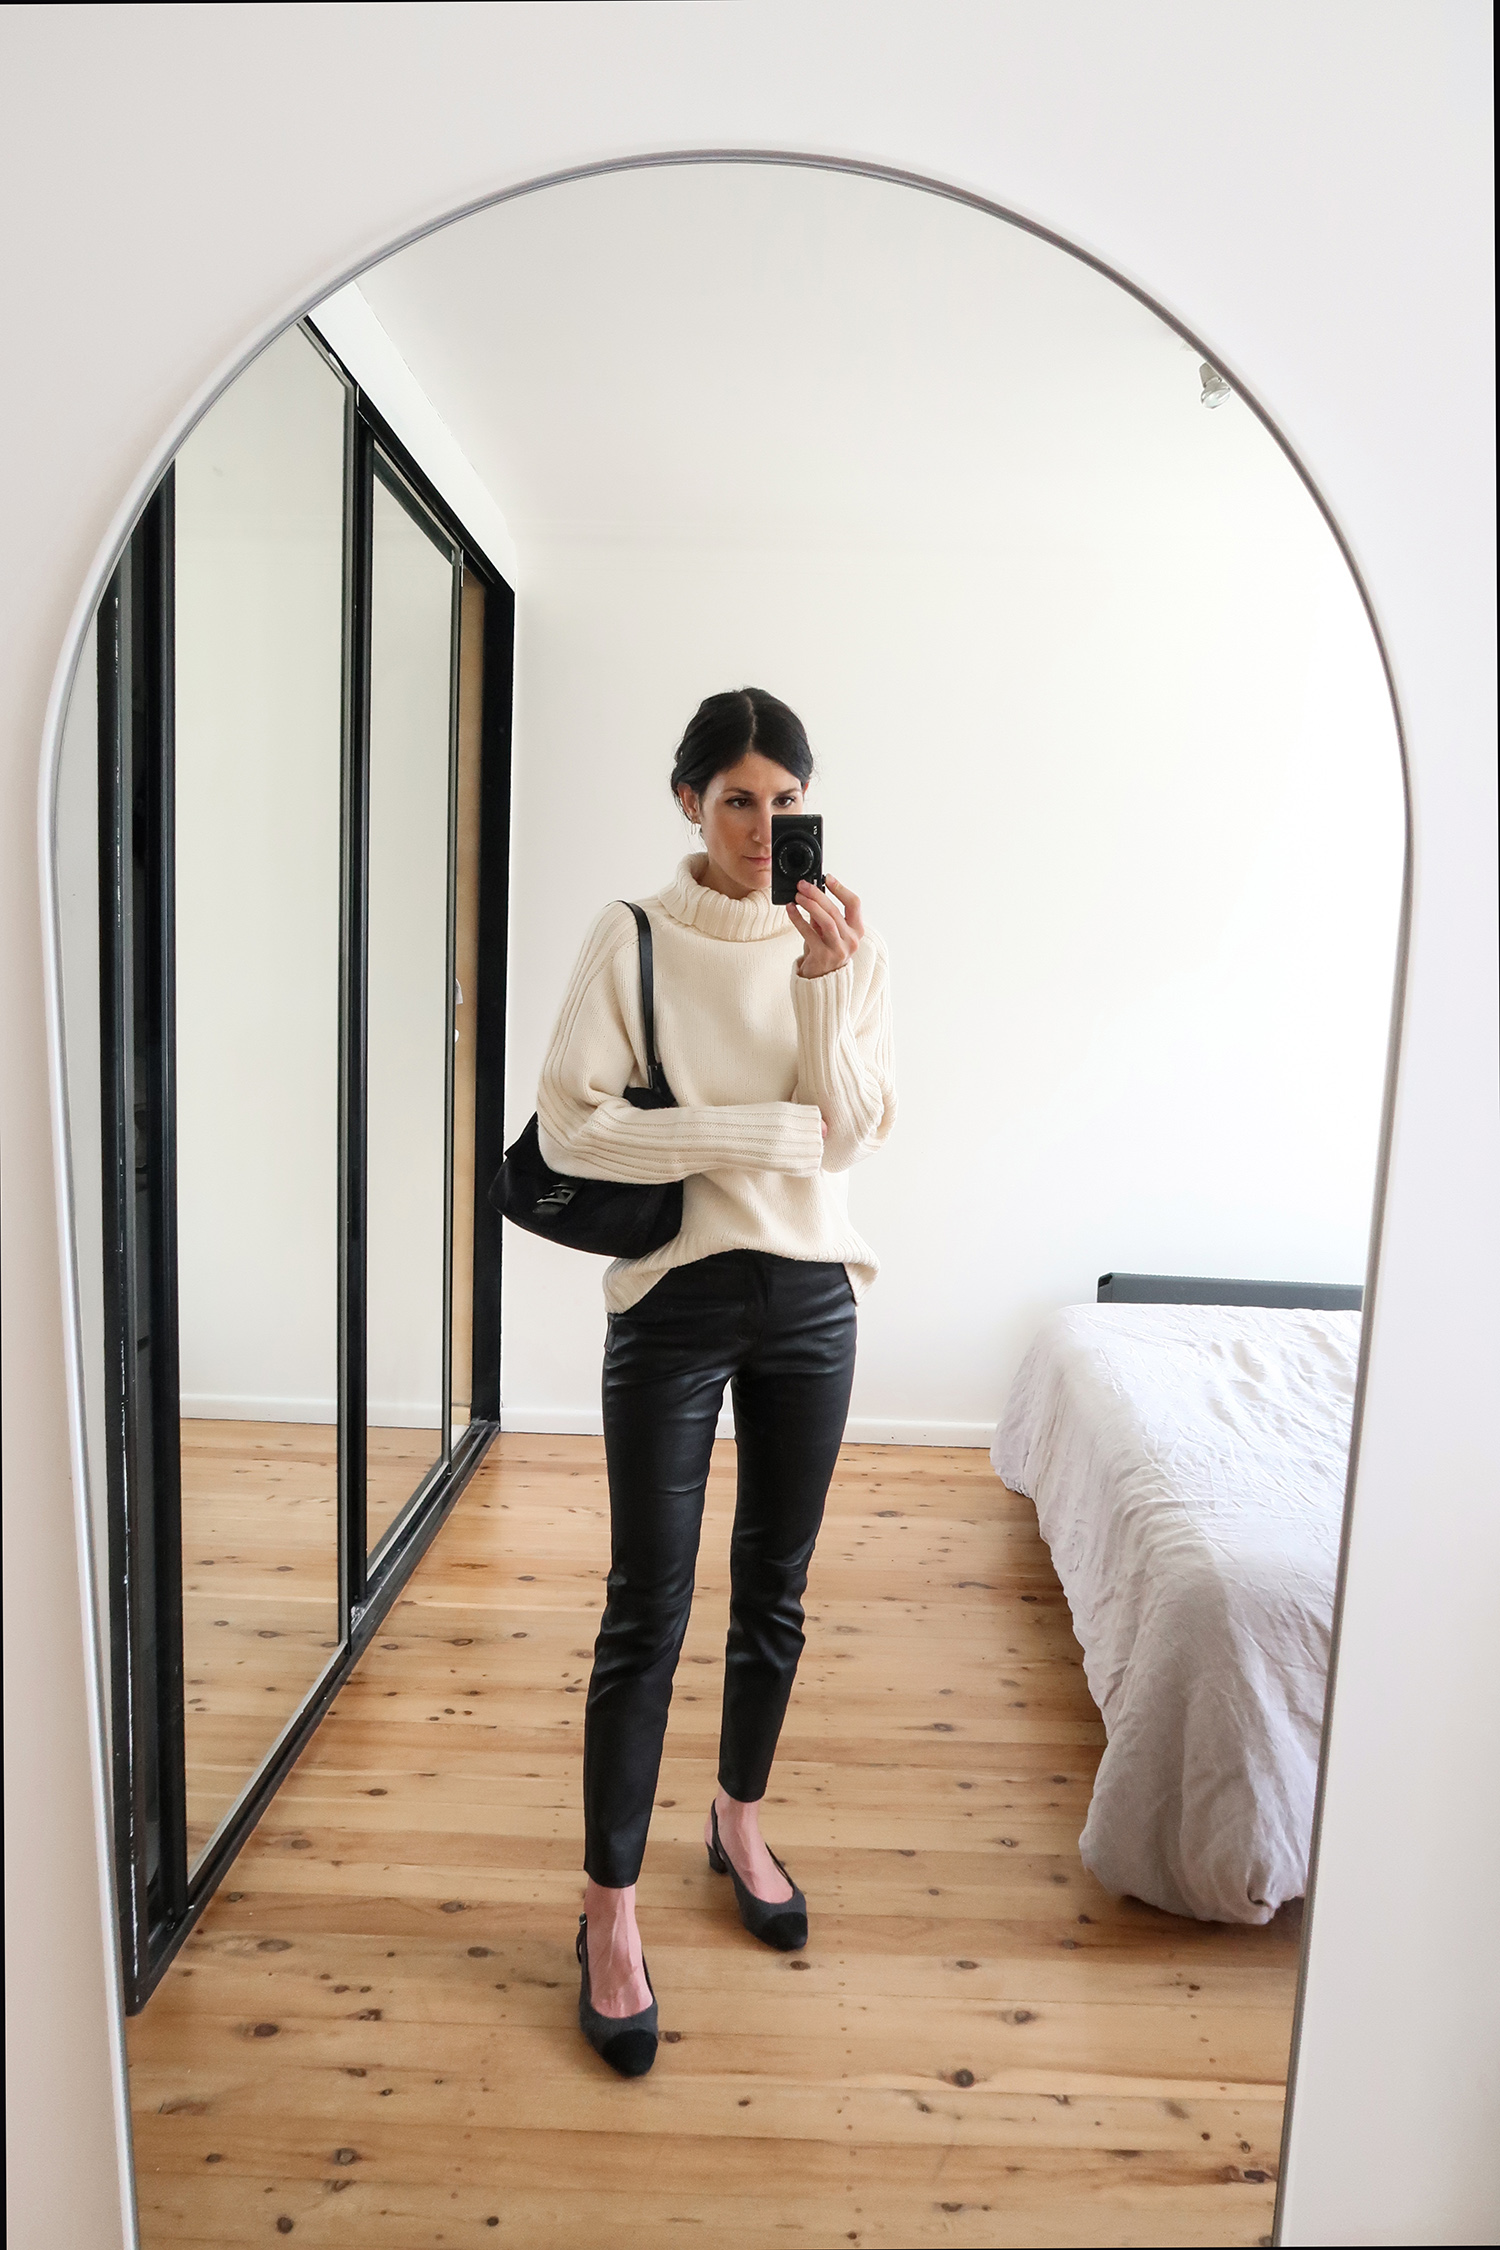 Jamie Lee of Mademoiselle wearing Joseph knit sweater with Grlfrnd leather trousers